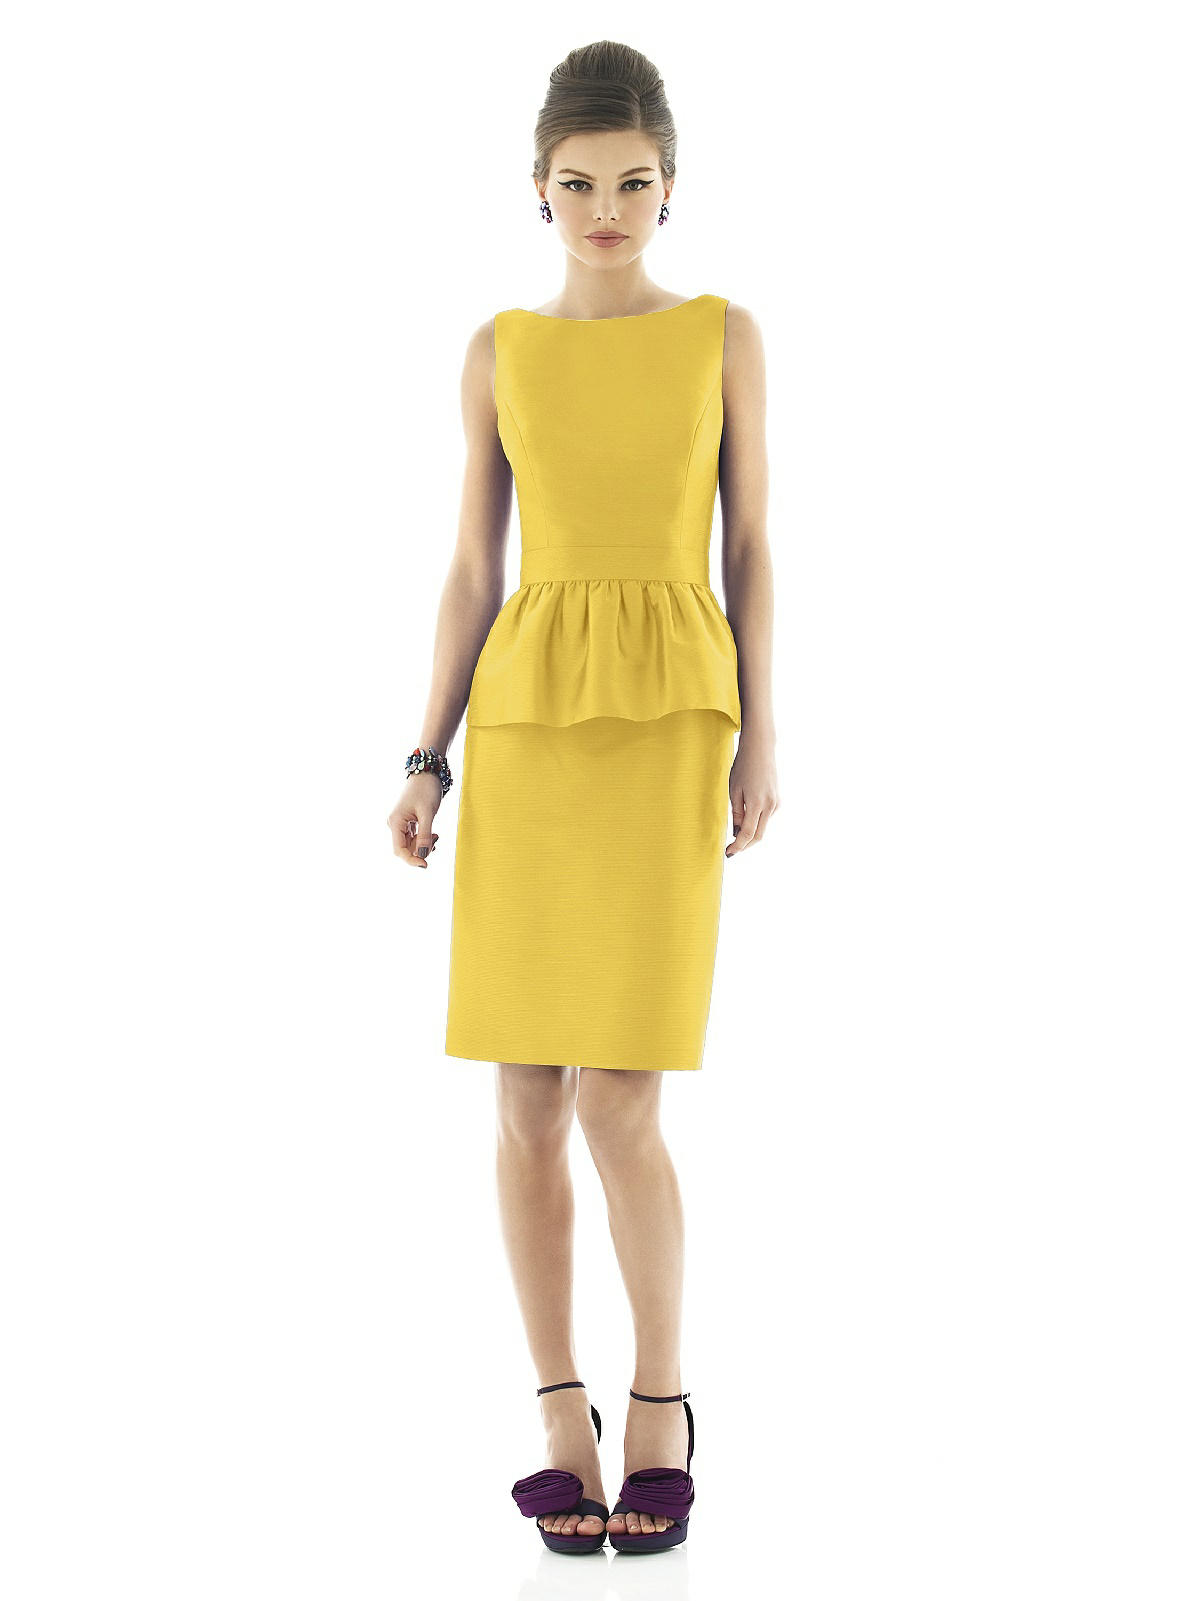 15 Adorable Canary Yellow Bridesmaids Dresses